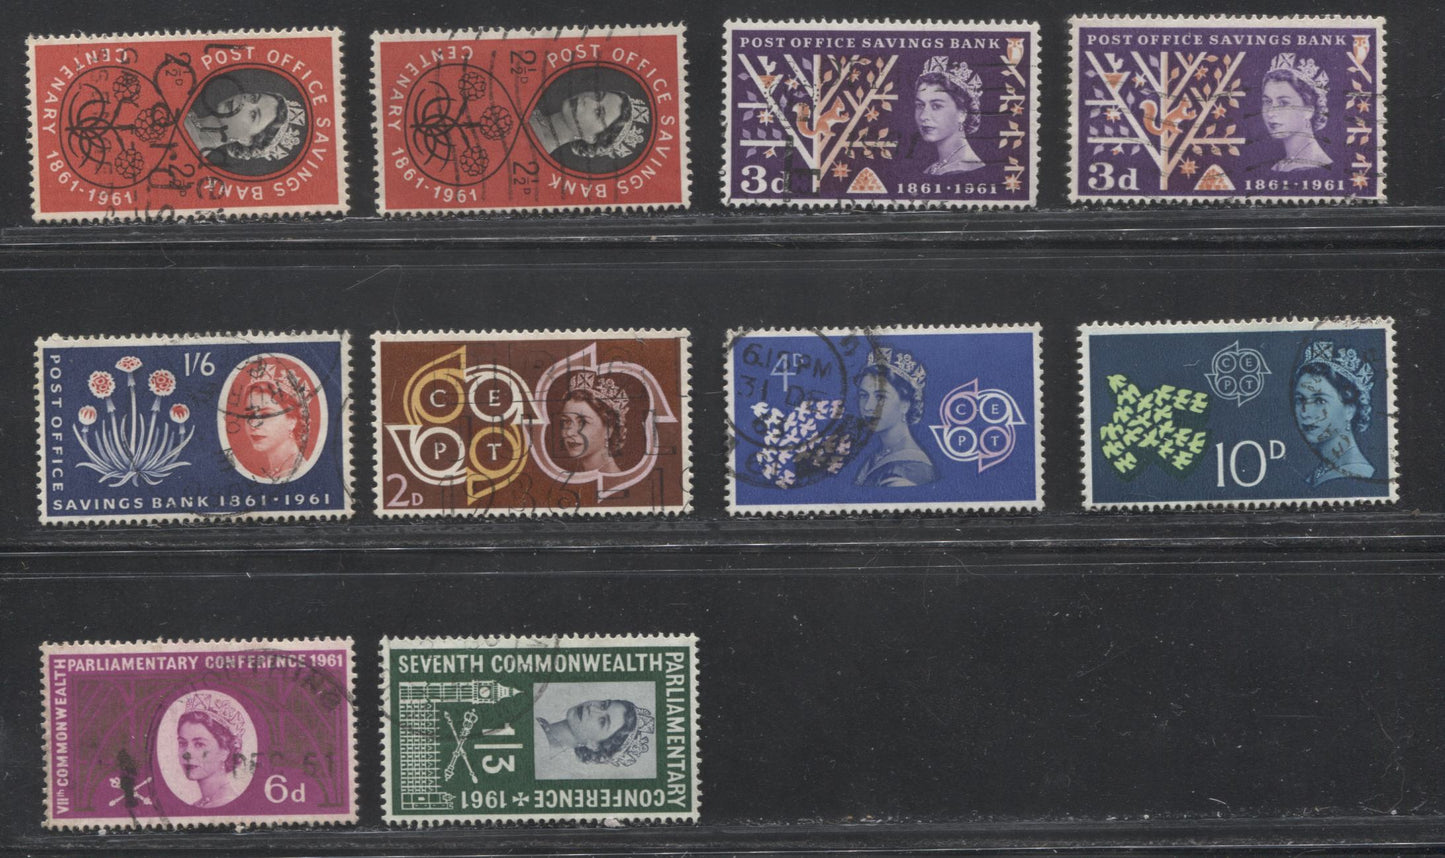 Great Britain #379-386 (SG#623A-630) 1961 Commemoratives, A Specialized Mostly Very Fine Used Lot of 10 Stamps, Including Timson and Thrissell Printings